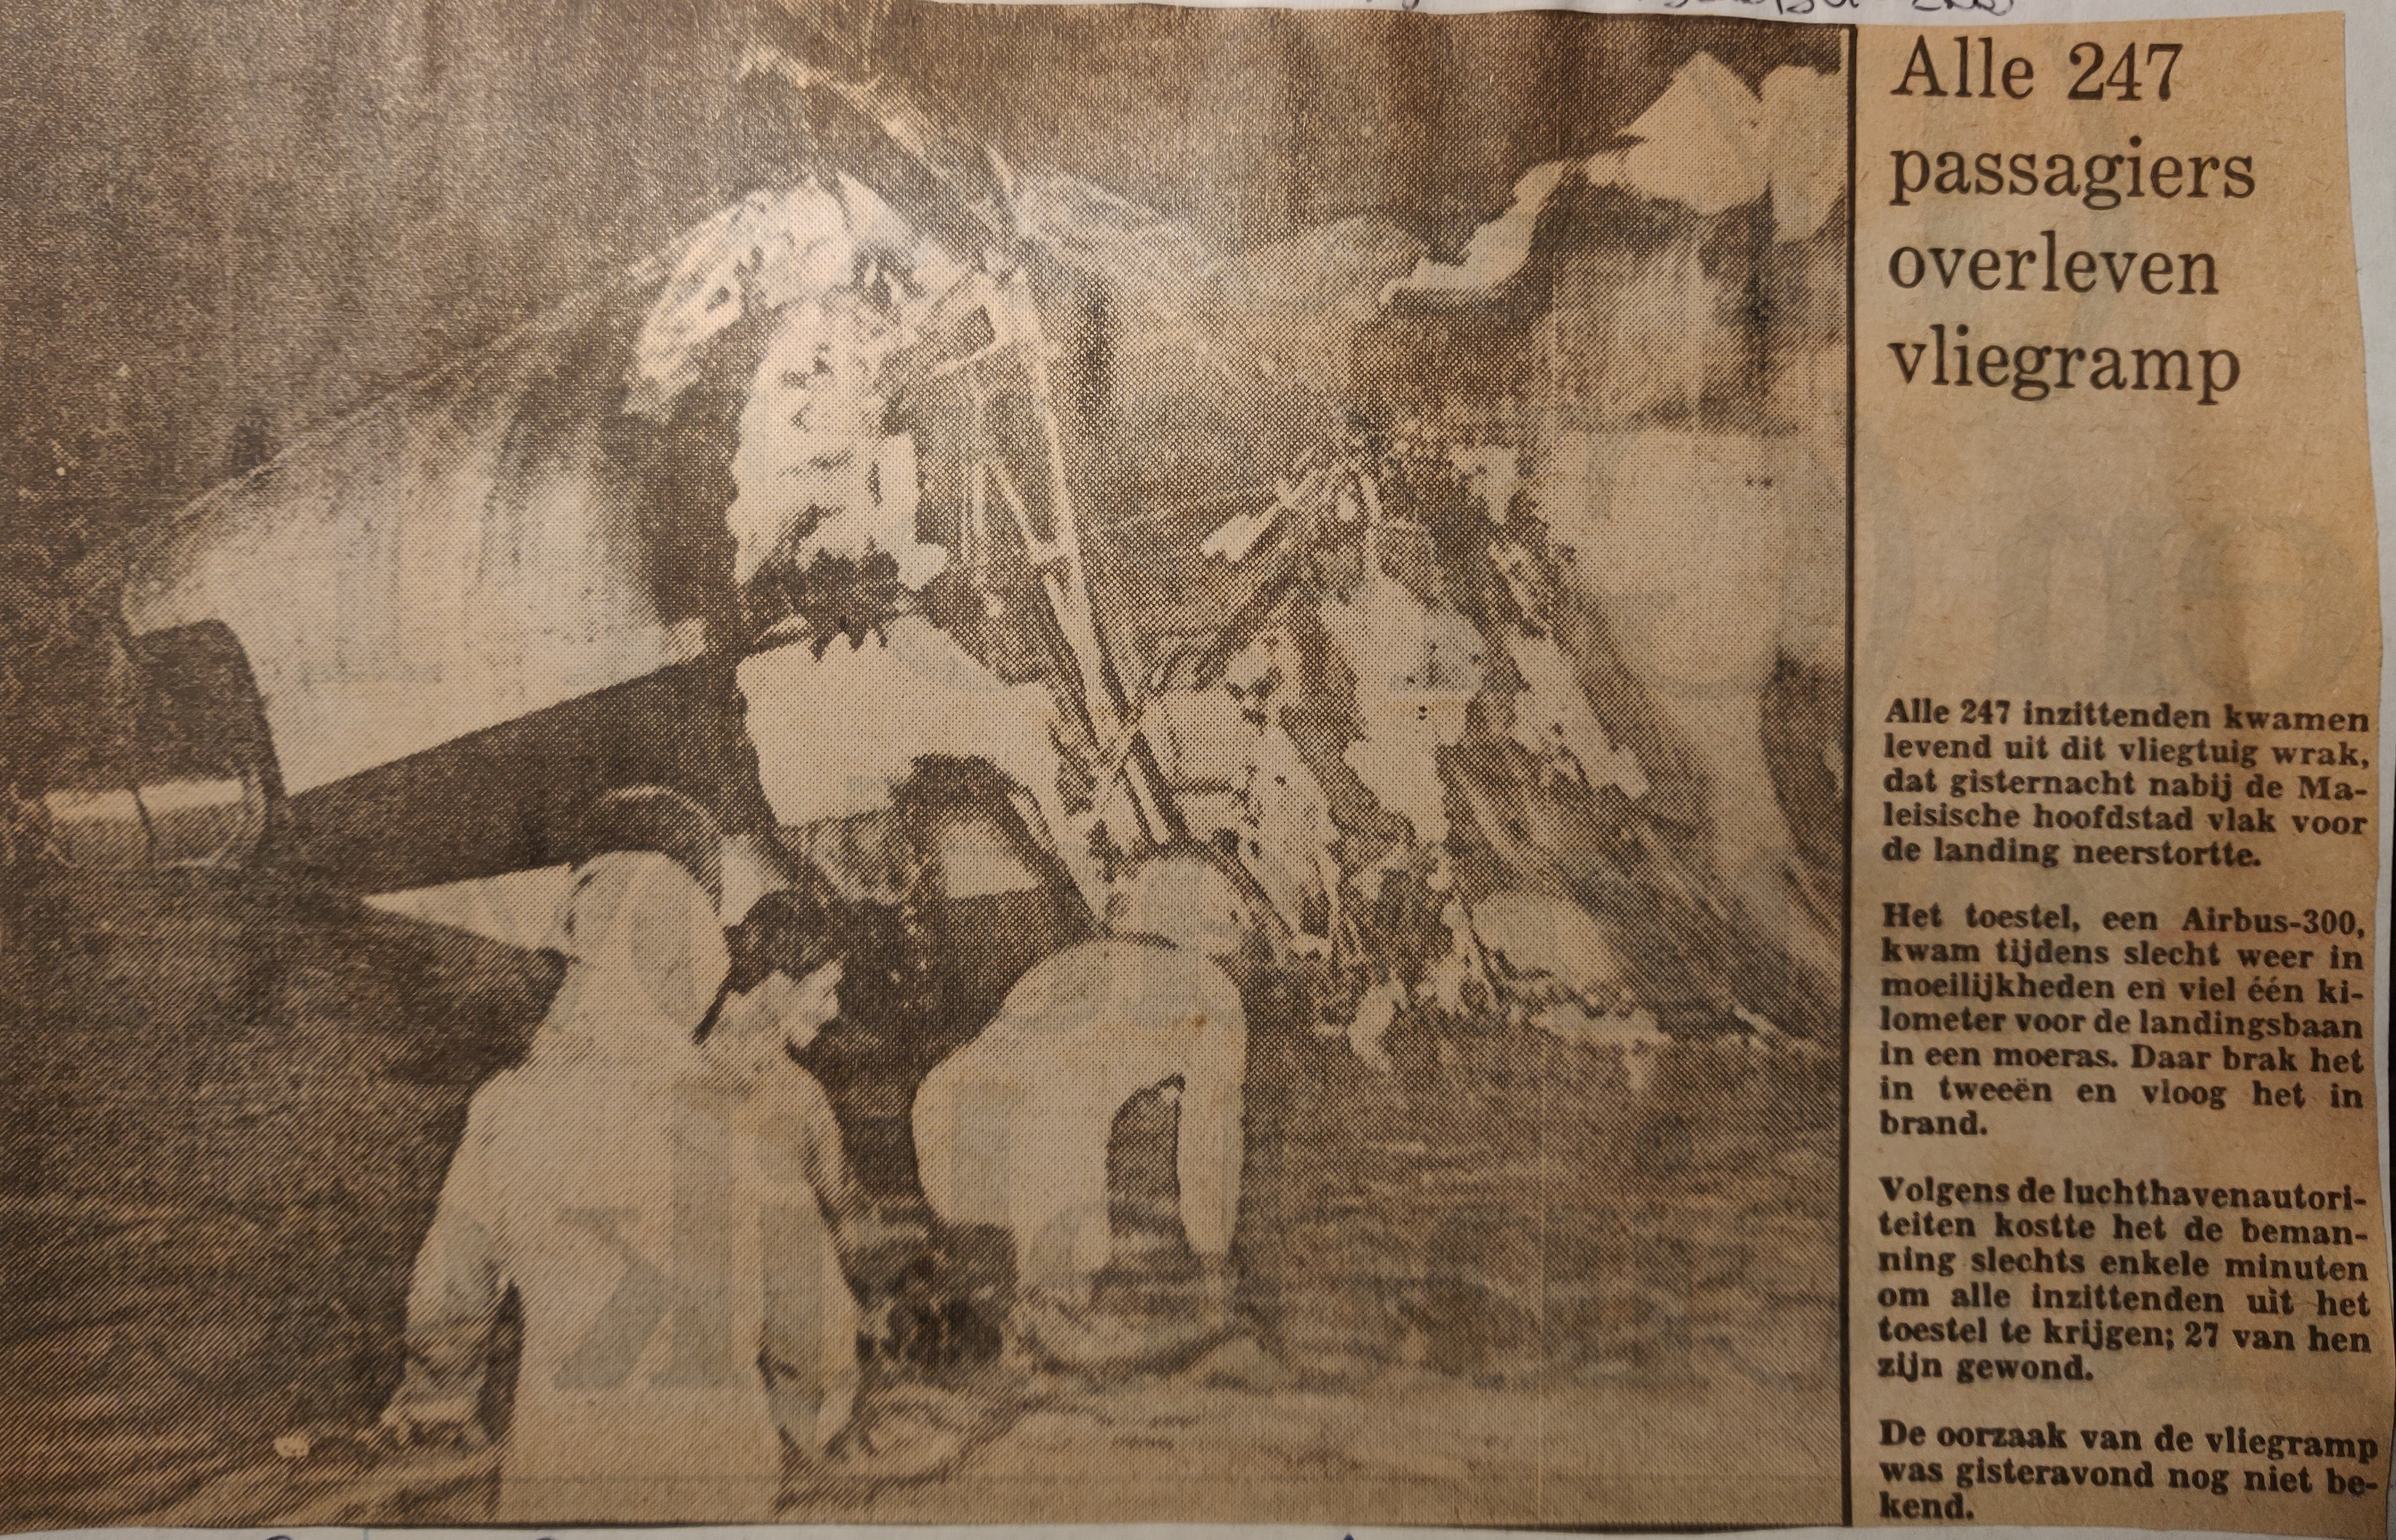 Newspaper article Airbus A300B4 crash near Kuala Lumpur, 18 December 1983 | rescuers approaching the Airbus wreckage 